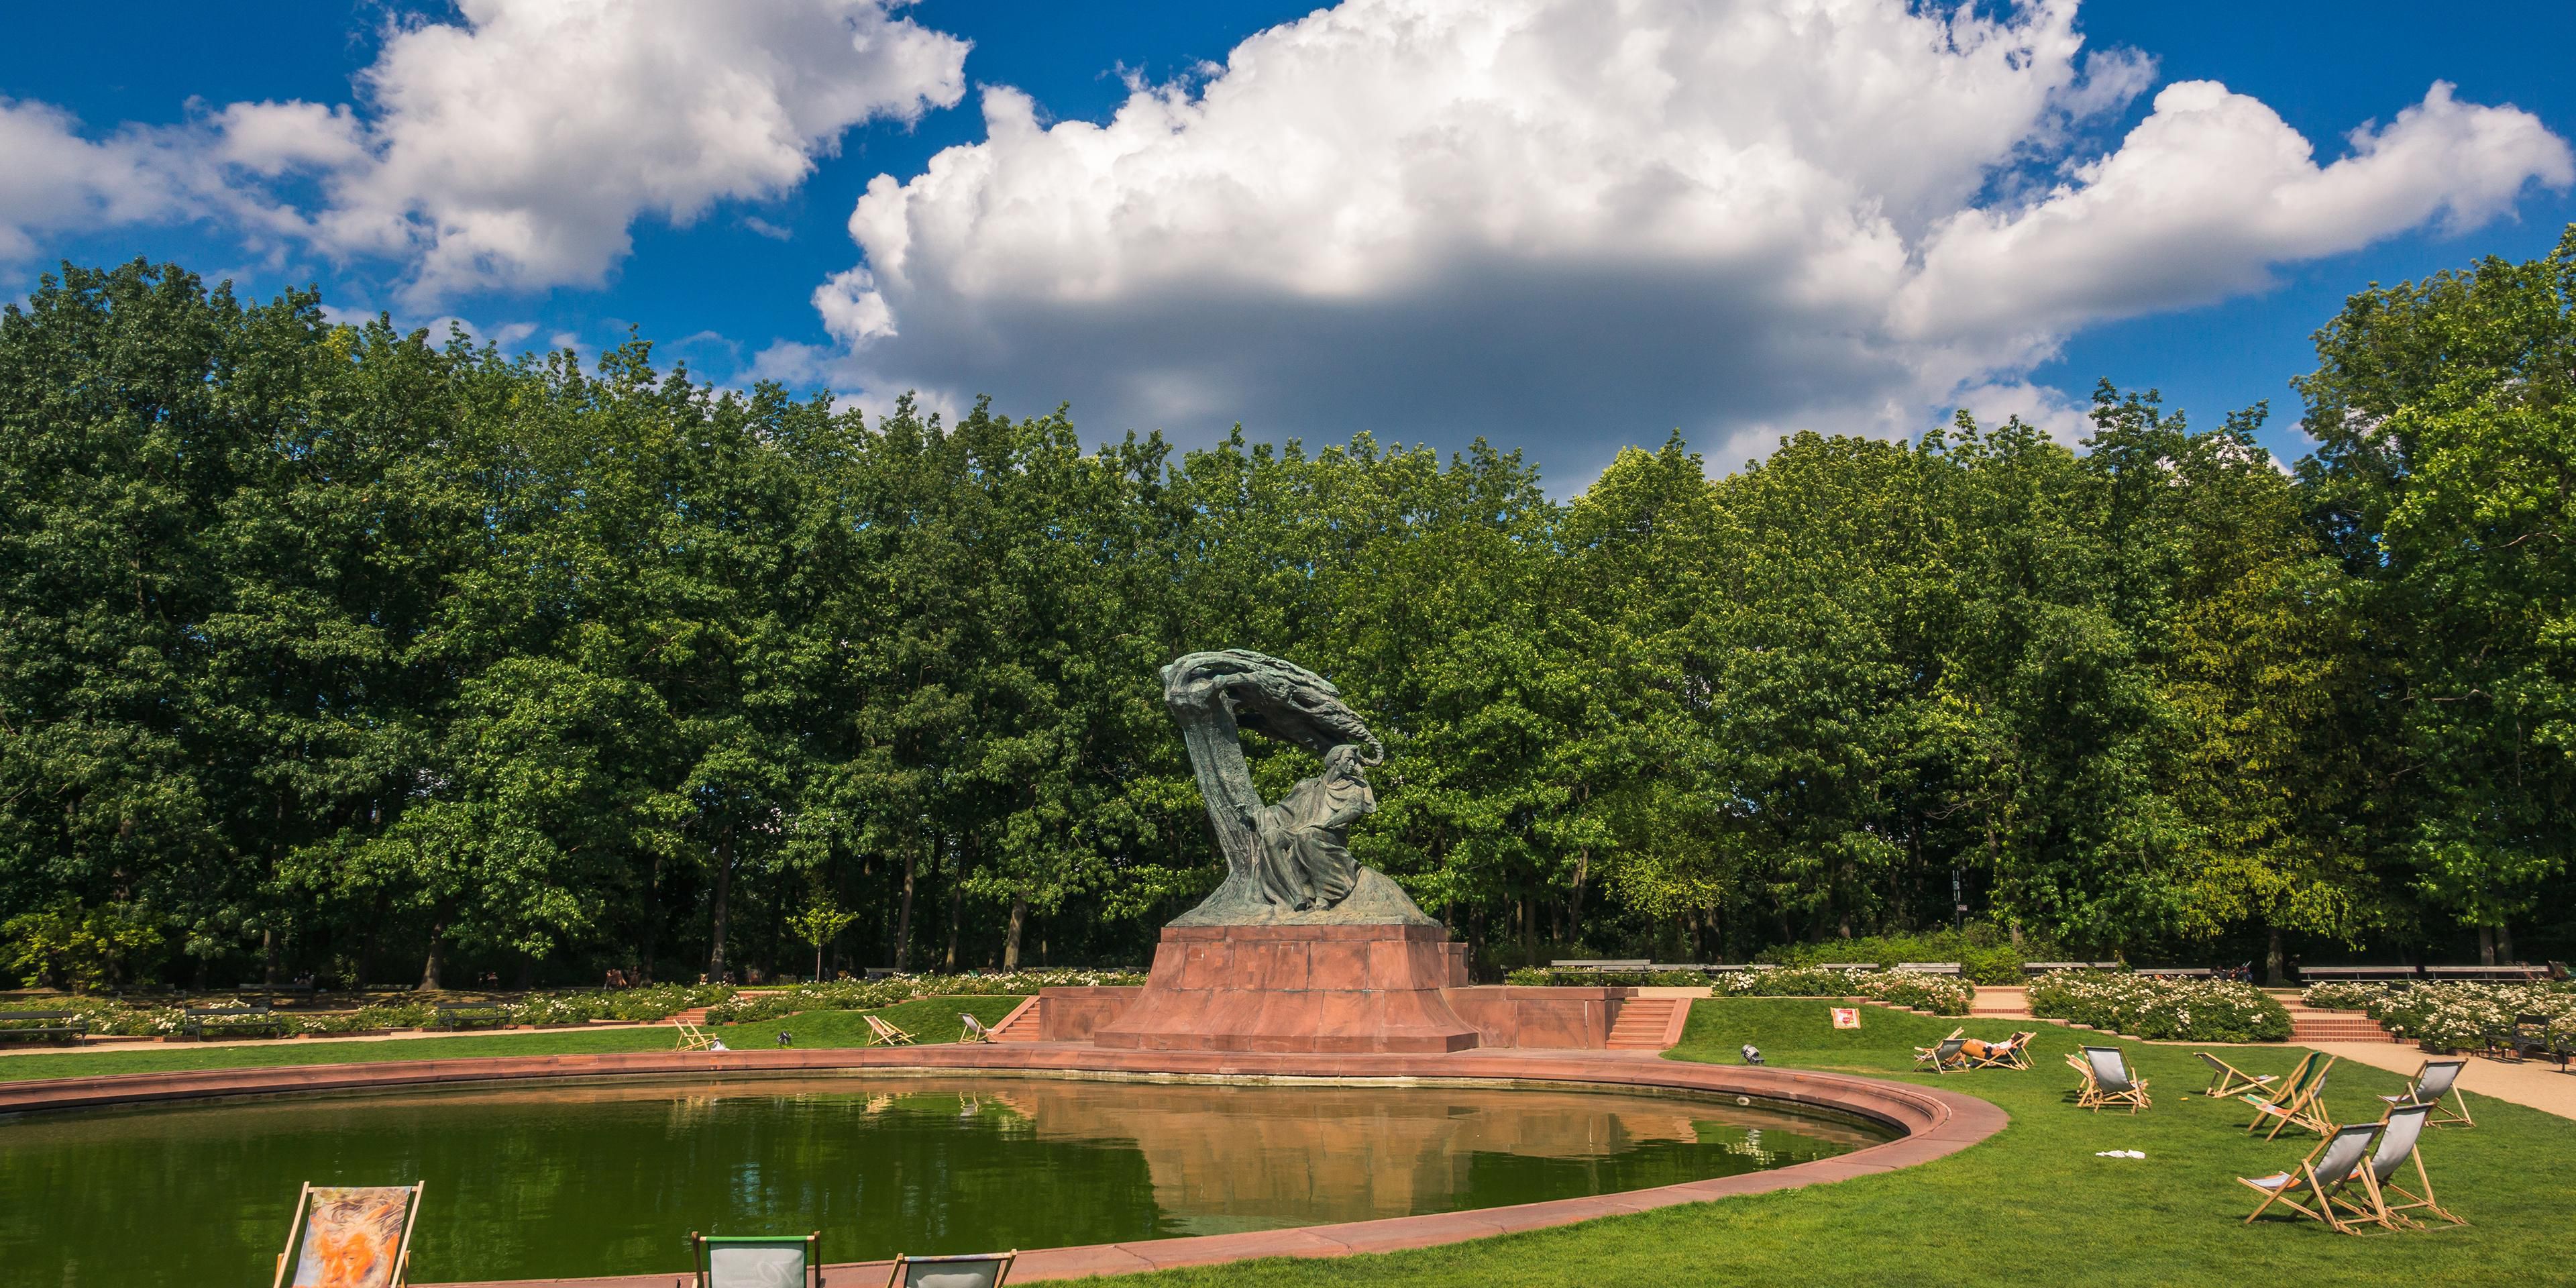 Enjoy the open air concert in the famous Lazienki Park. Summer recitals will take place every Sunday at 12.00 and 16.00. You will hear pianists of worldwide renown, including outstanding musicians of the younger generation.
The admission is free.